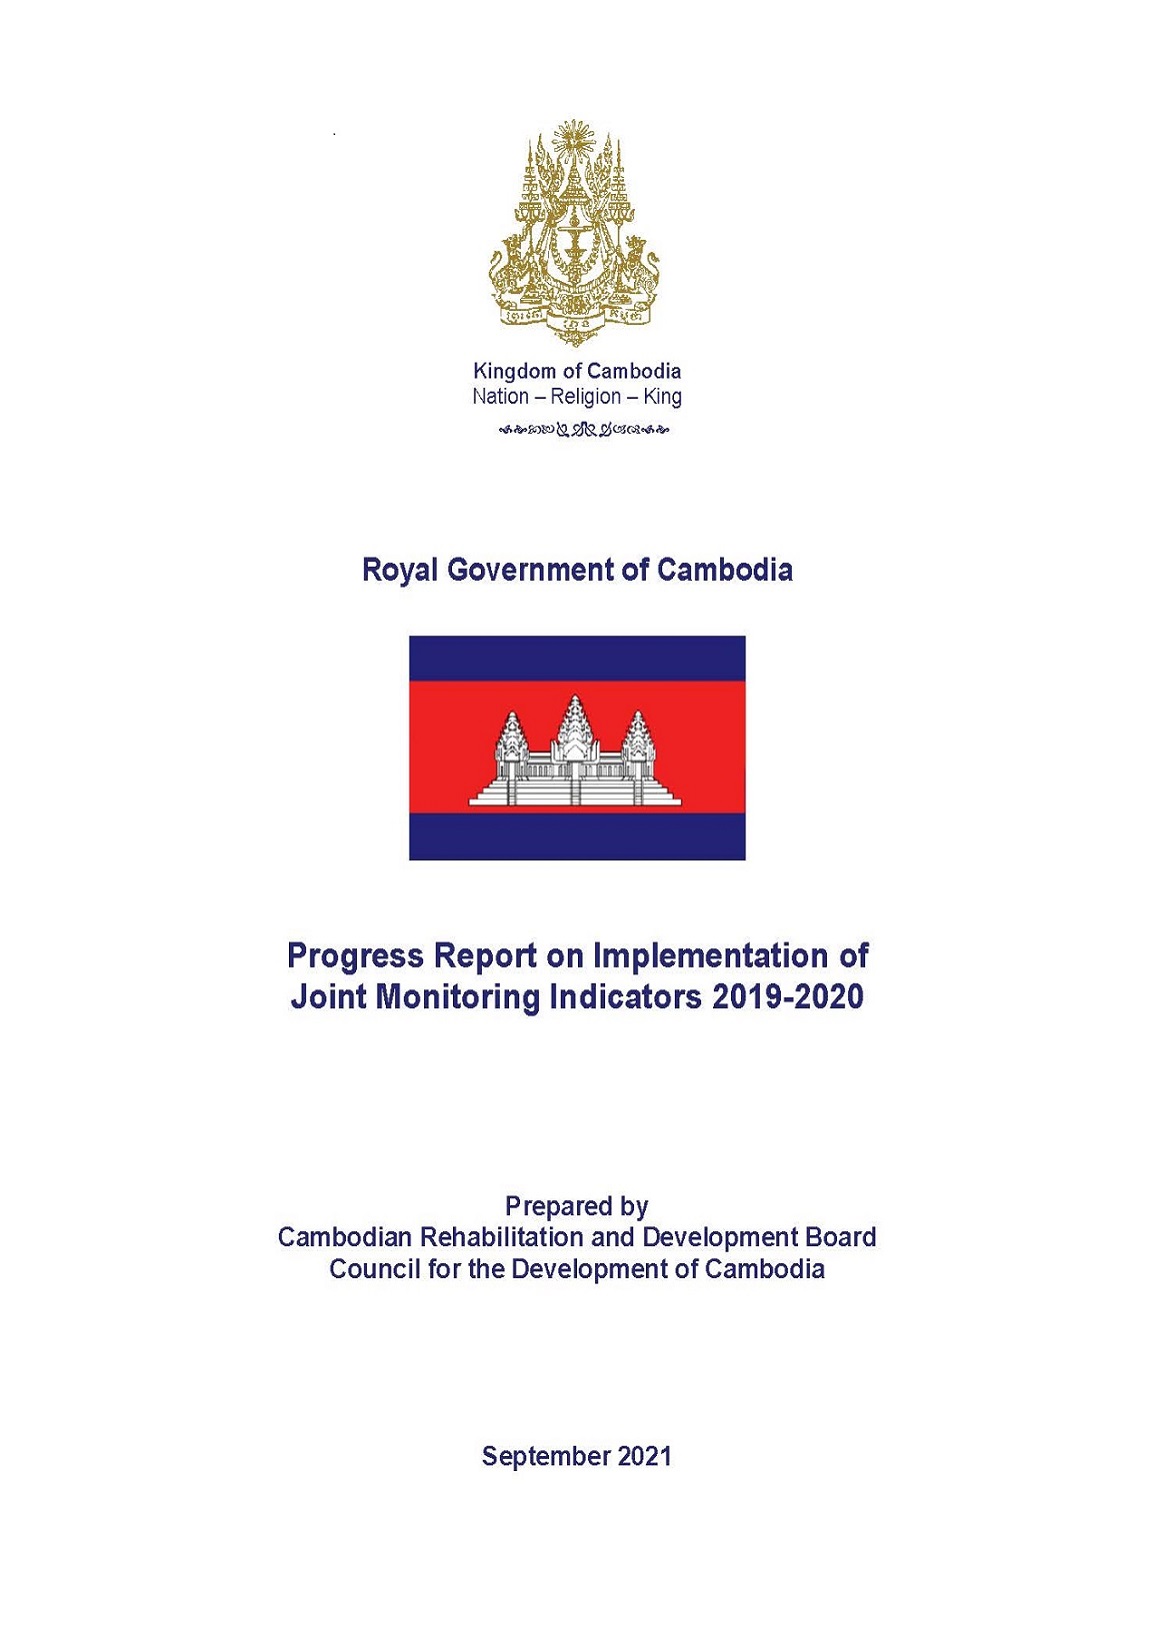 Progress Report on Implementation of Joint Monitoring Indicators 2019-2020